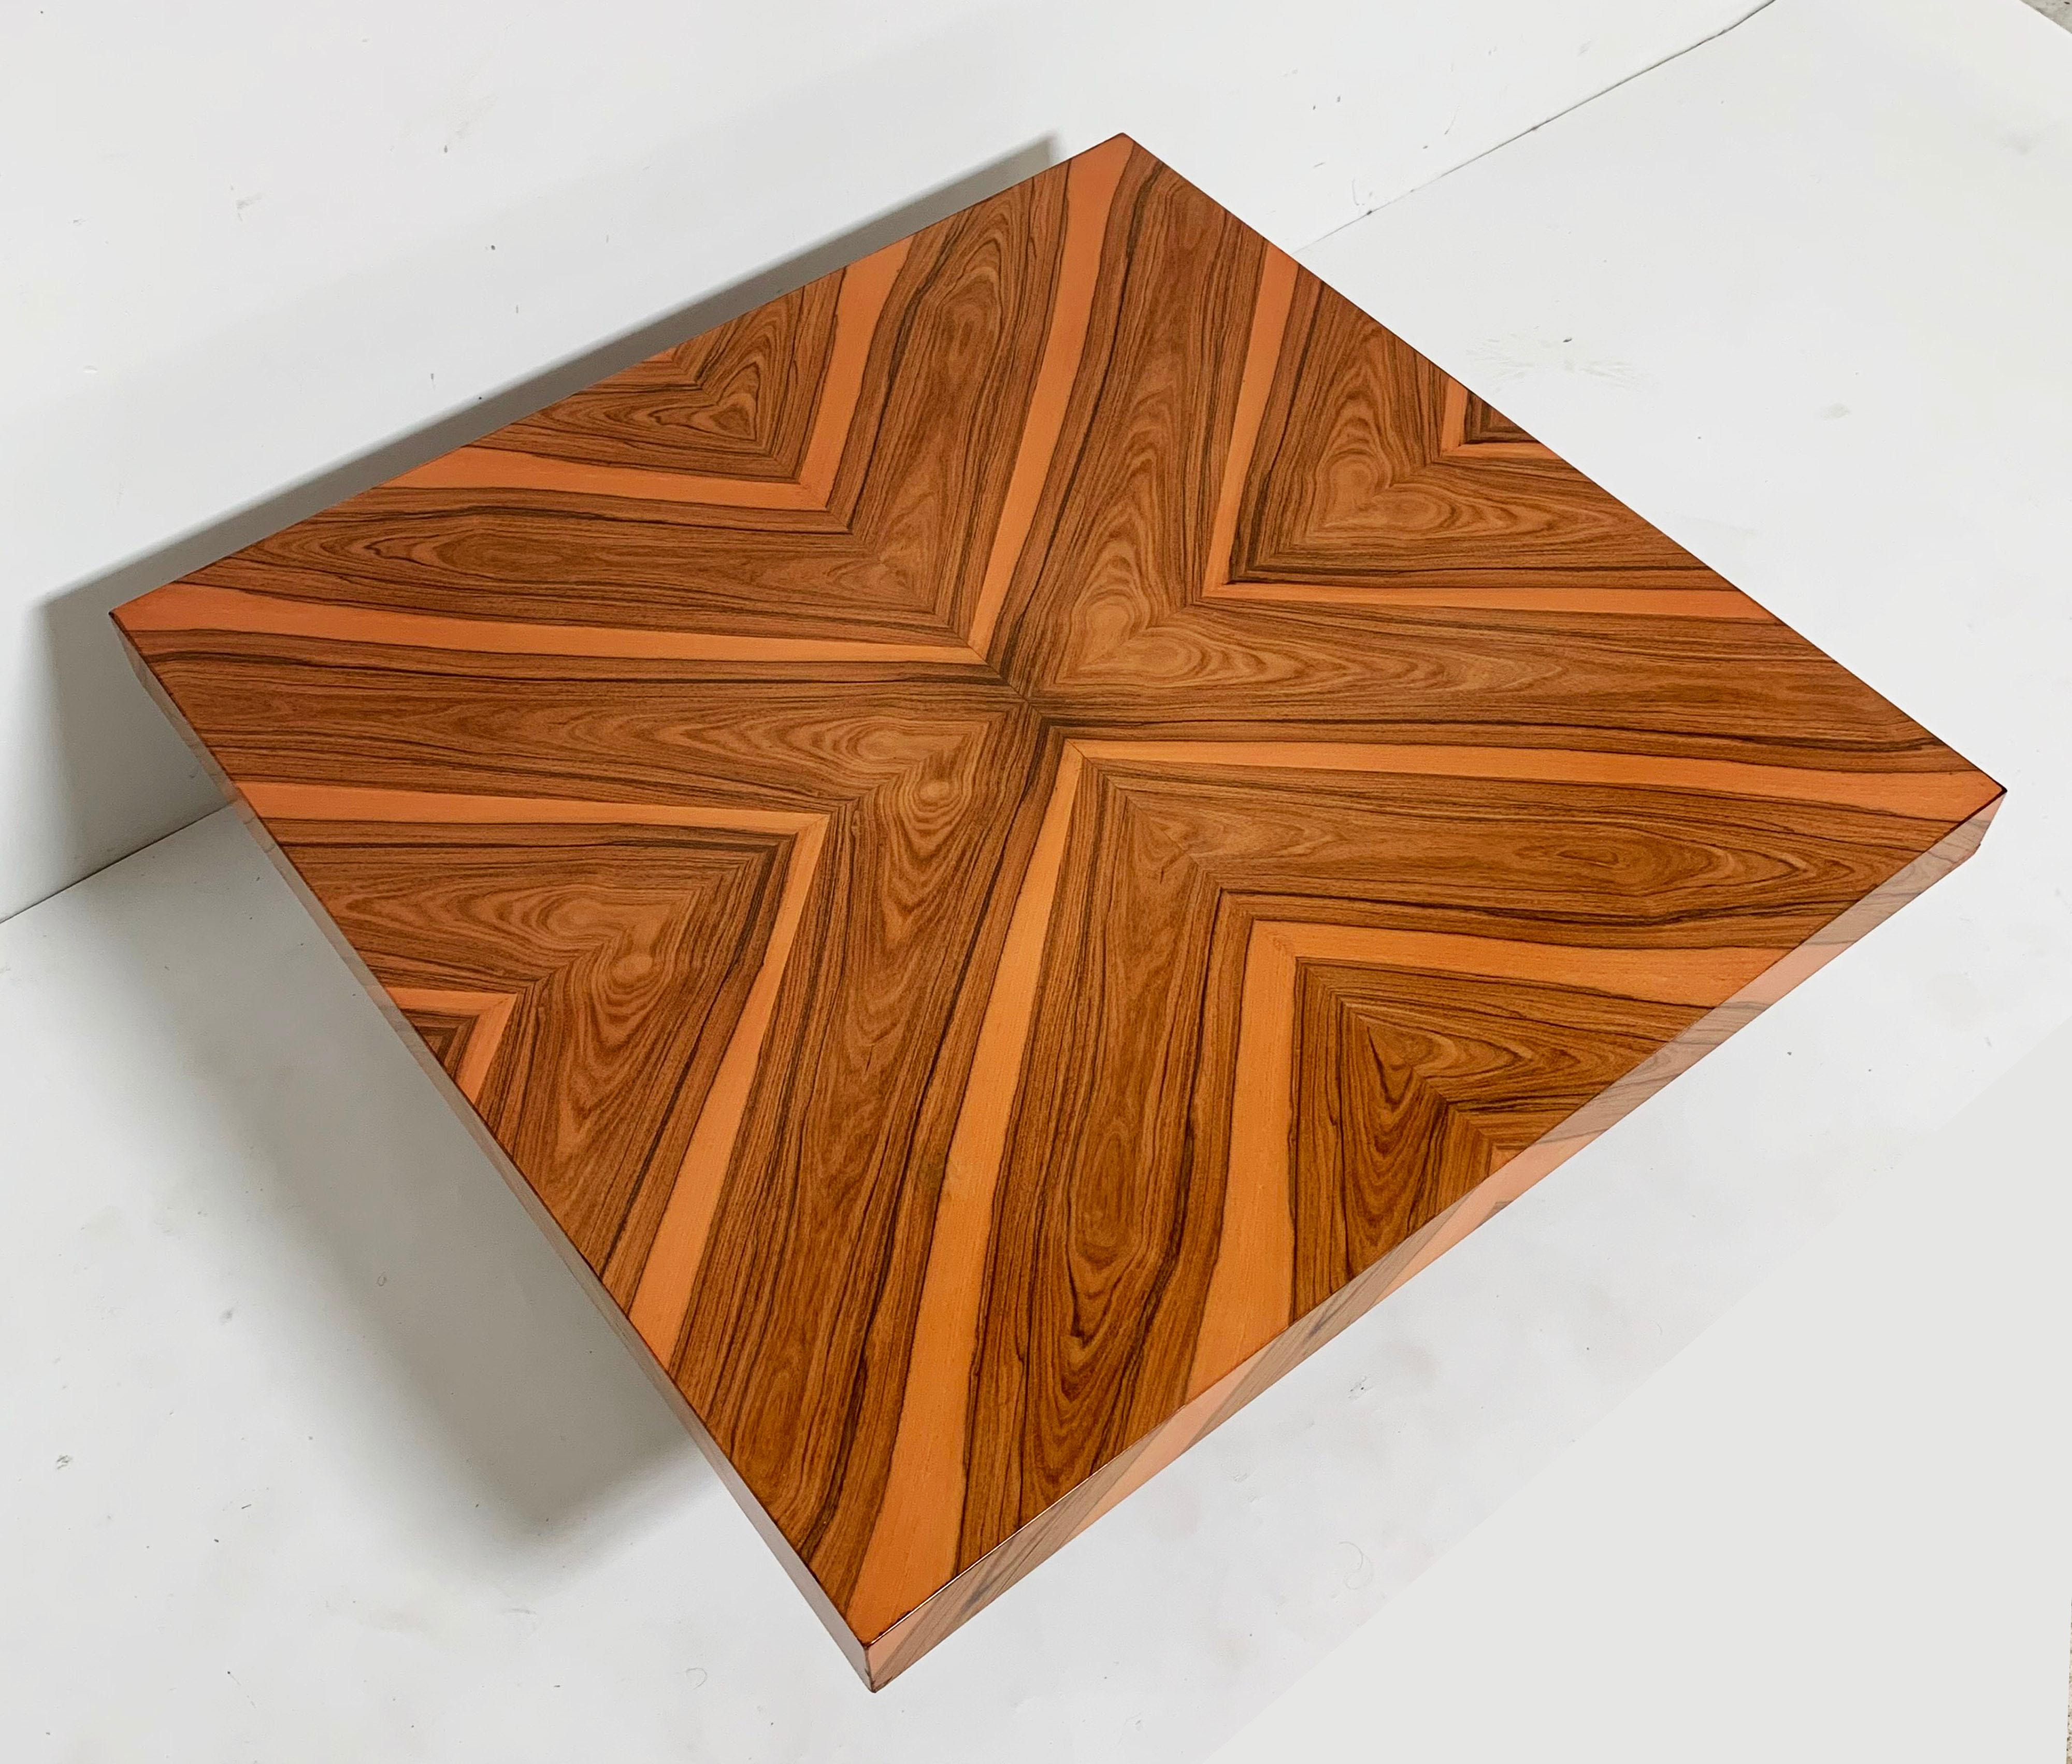 A 1970s Thayer Coggin 40” square cocktail table by Milo Baughman in reverse diamond Brasilia wood inlay pattern with chromed base.